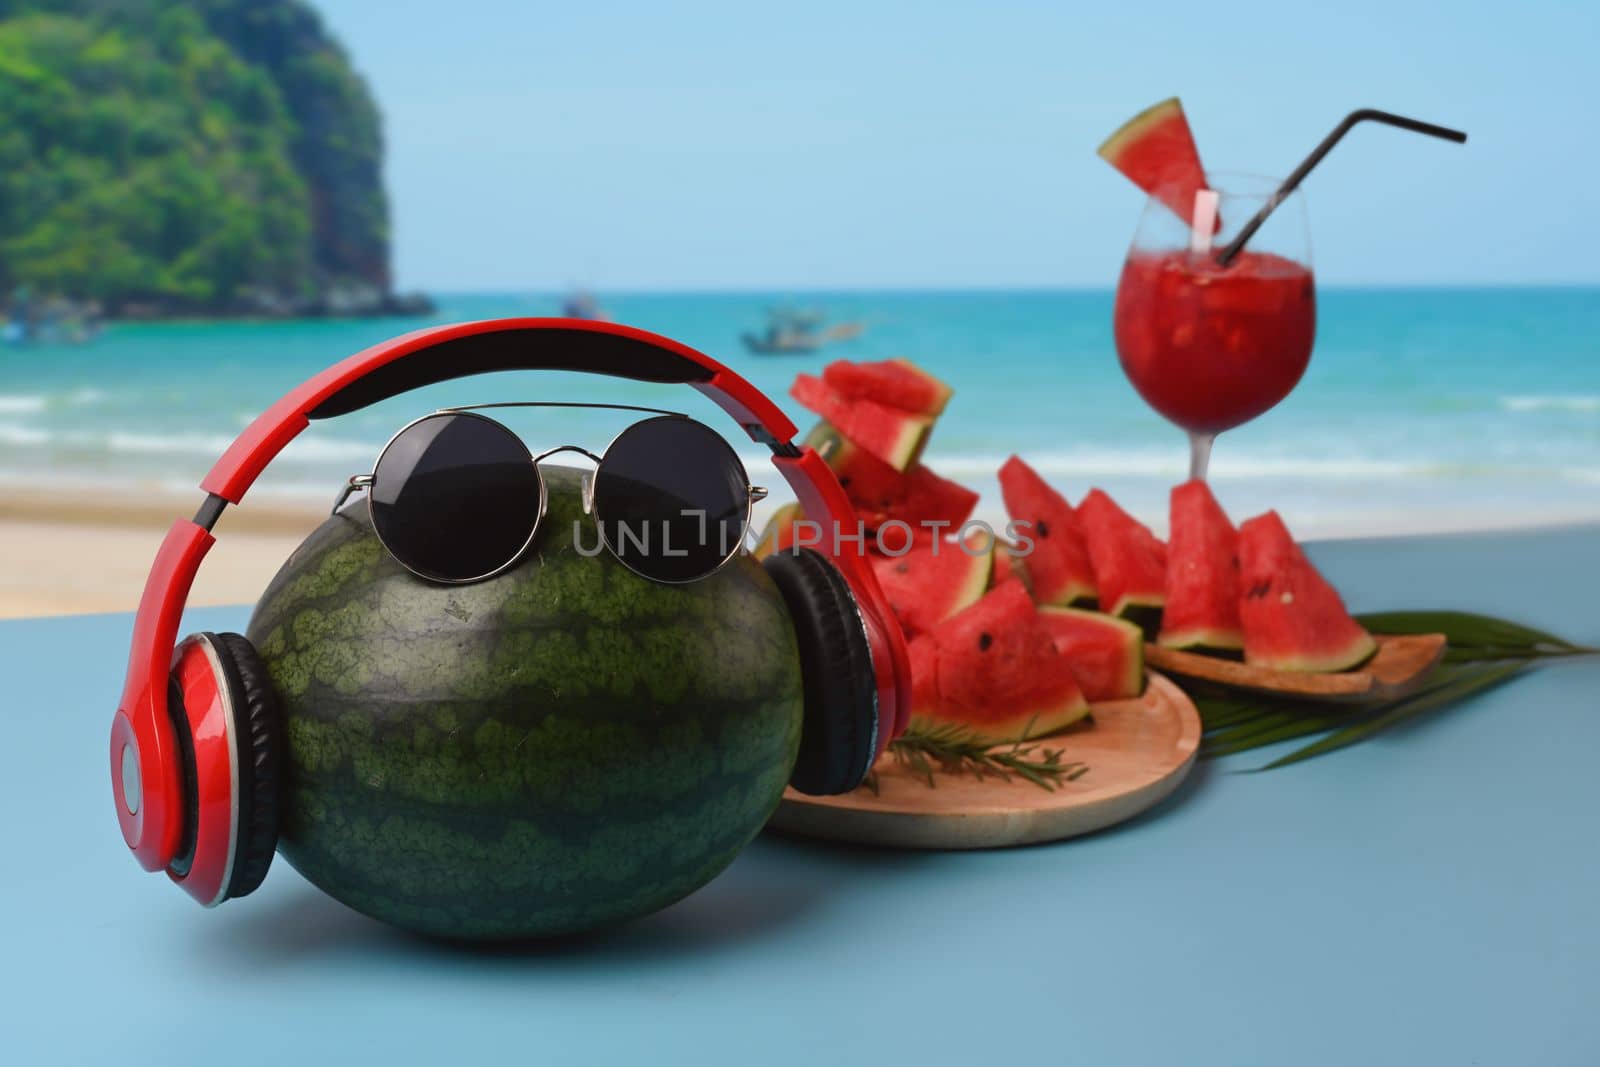 Whole watermelon and watermelon smoothie on table with beautiful summer beach in background. by prathanchorruangsak